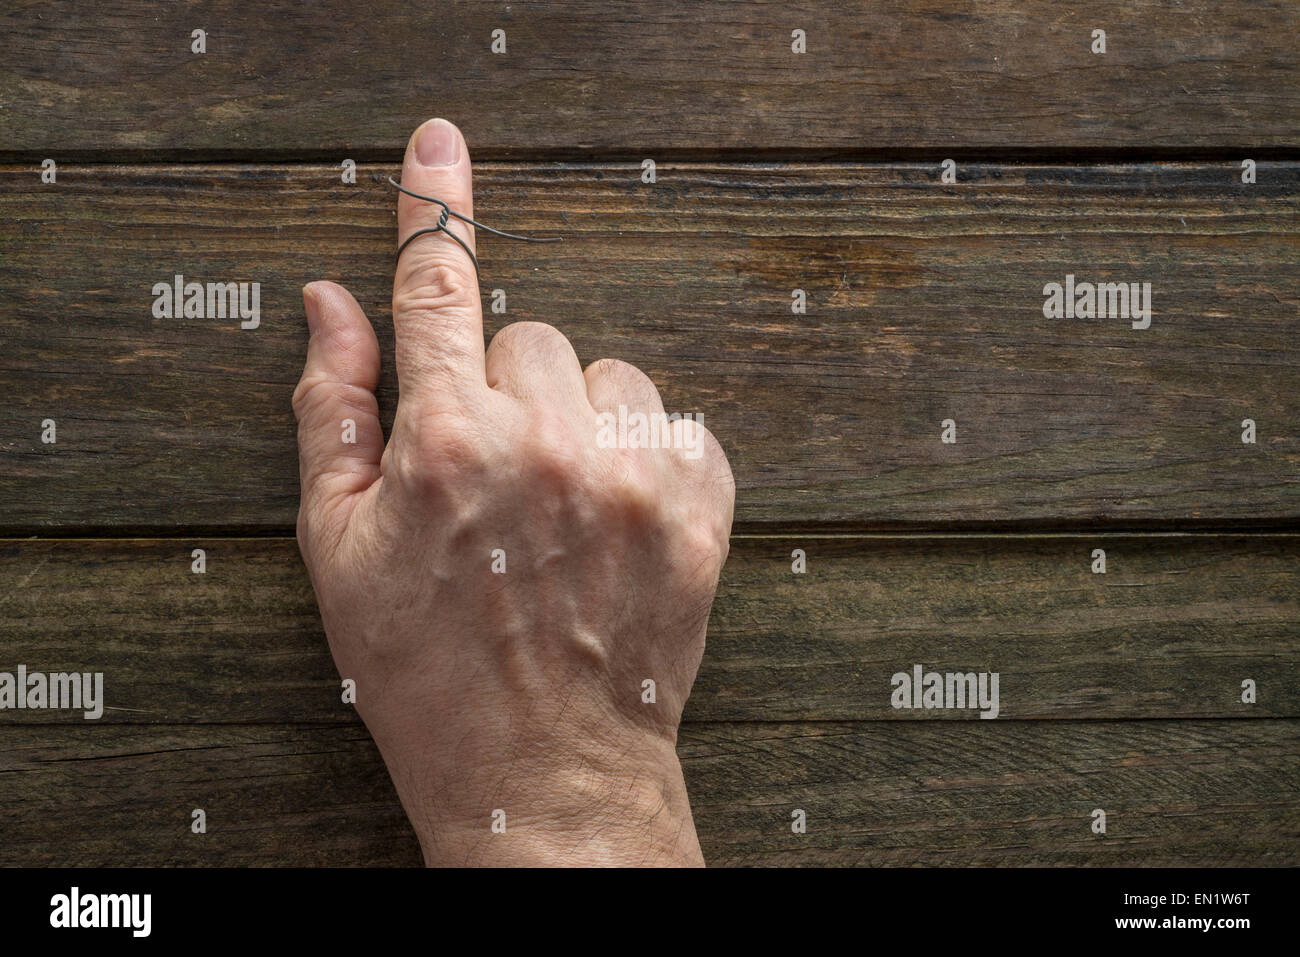 Wire on index finger of an elderly man. Wooden background Stock Photo